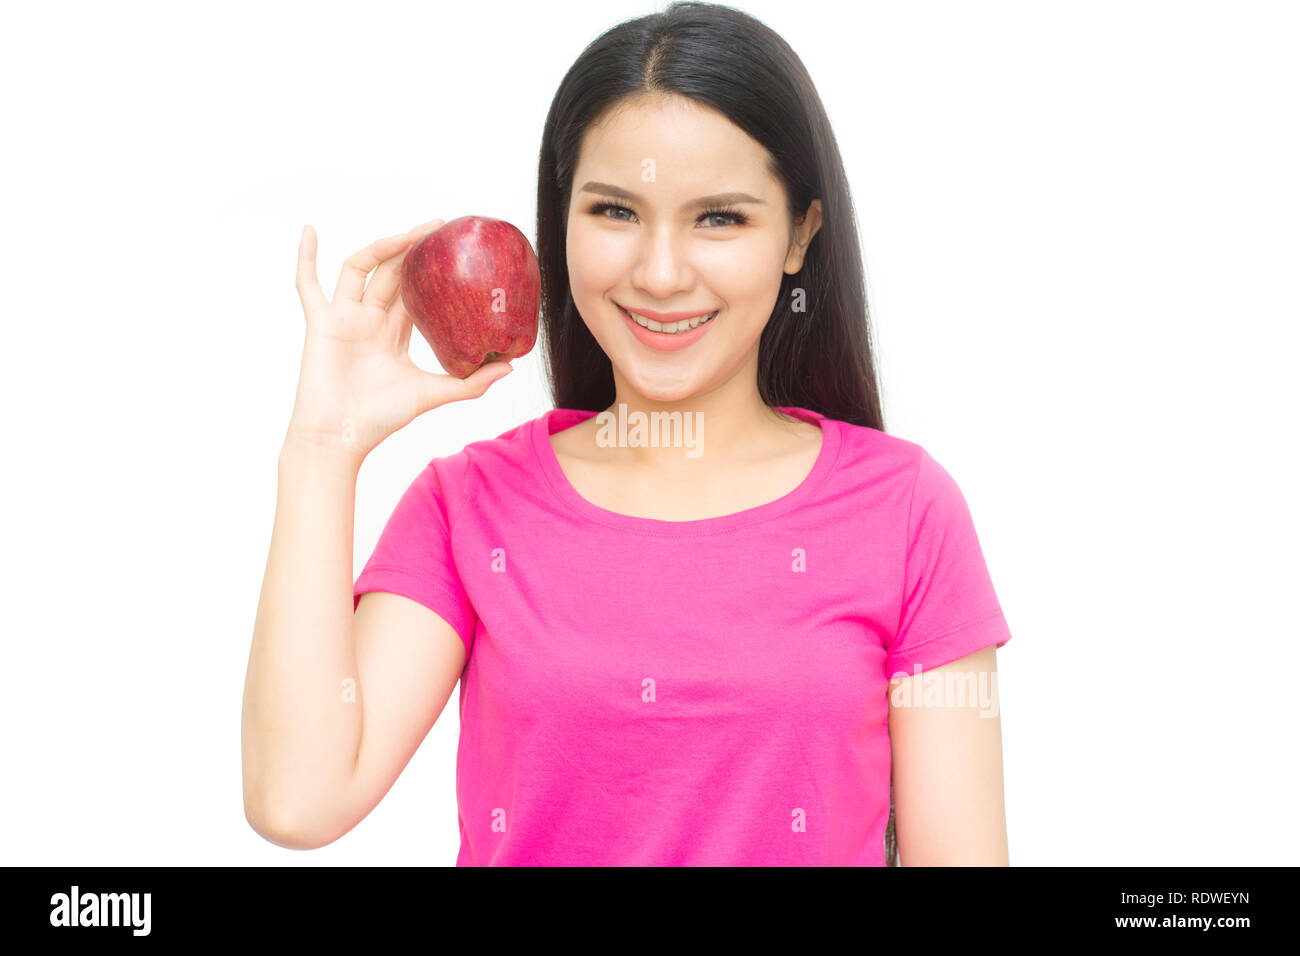 Health girl show red apple with smile face isolated on white background, healthy eating food concept Stock Photo